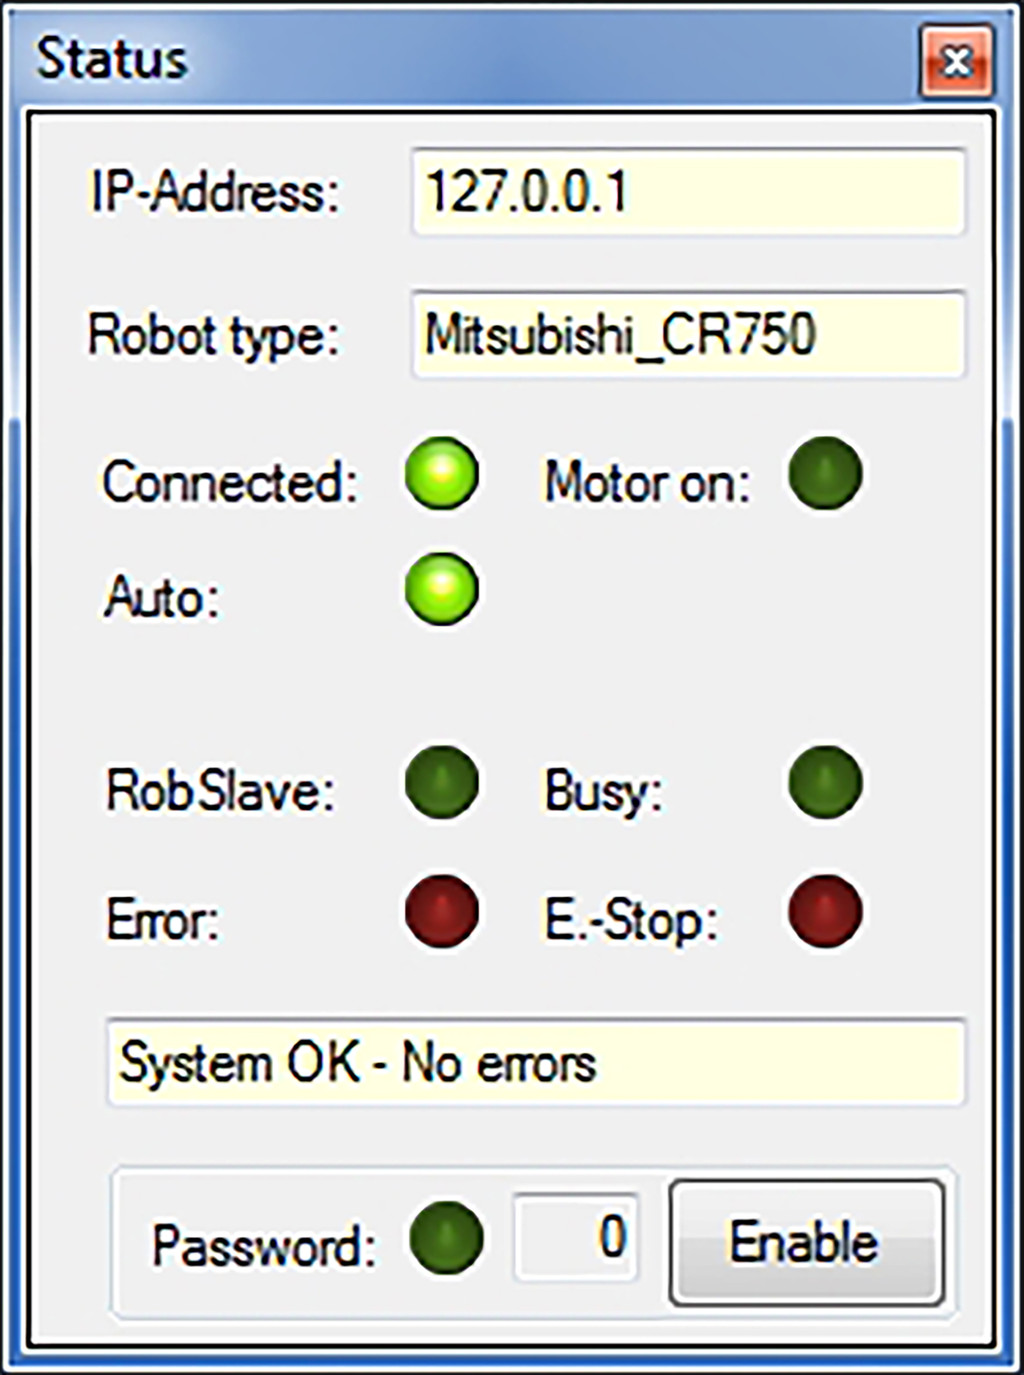 Status report of a connected robot